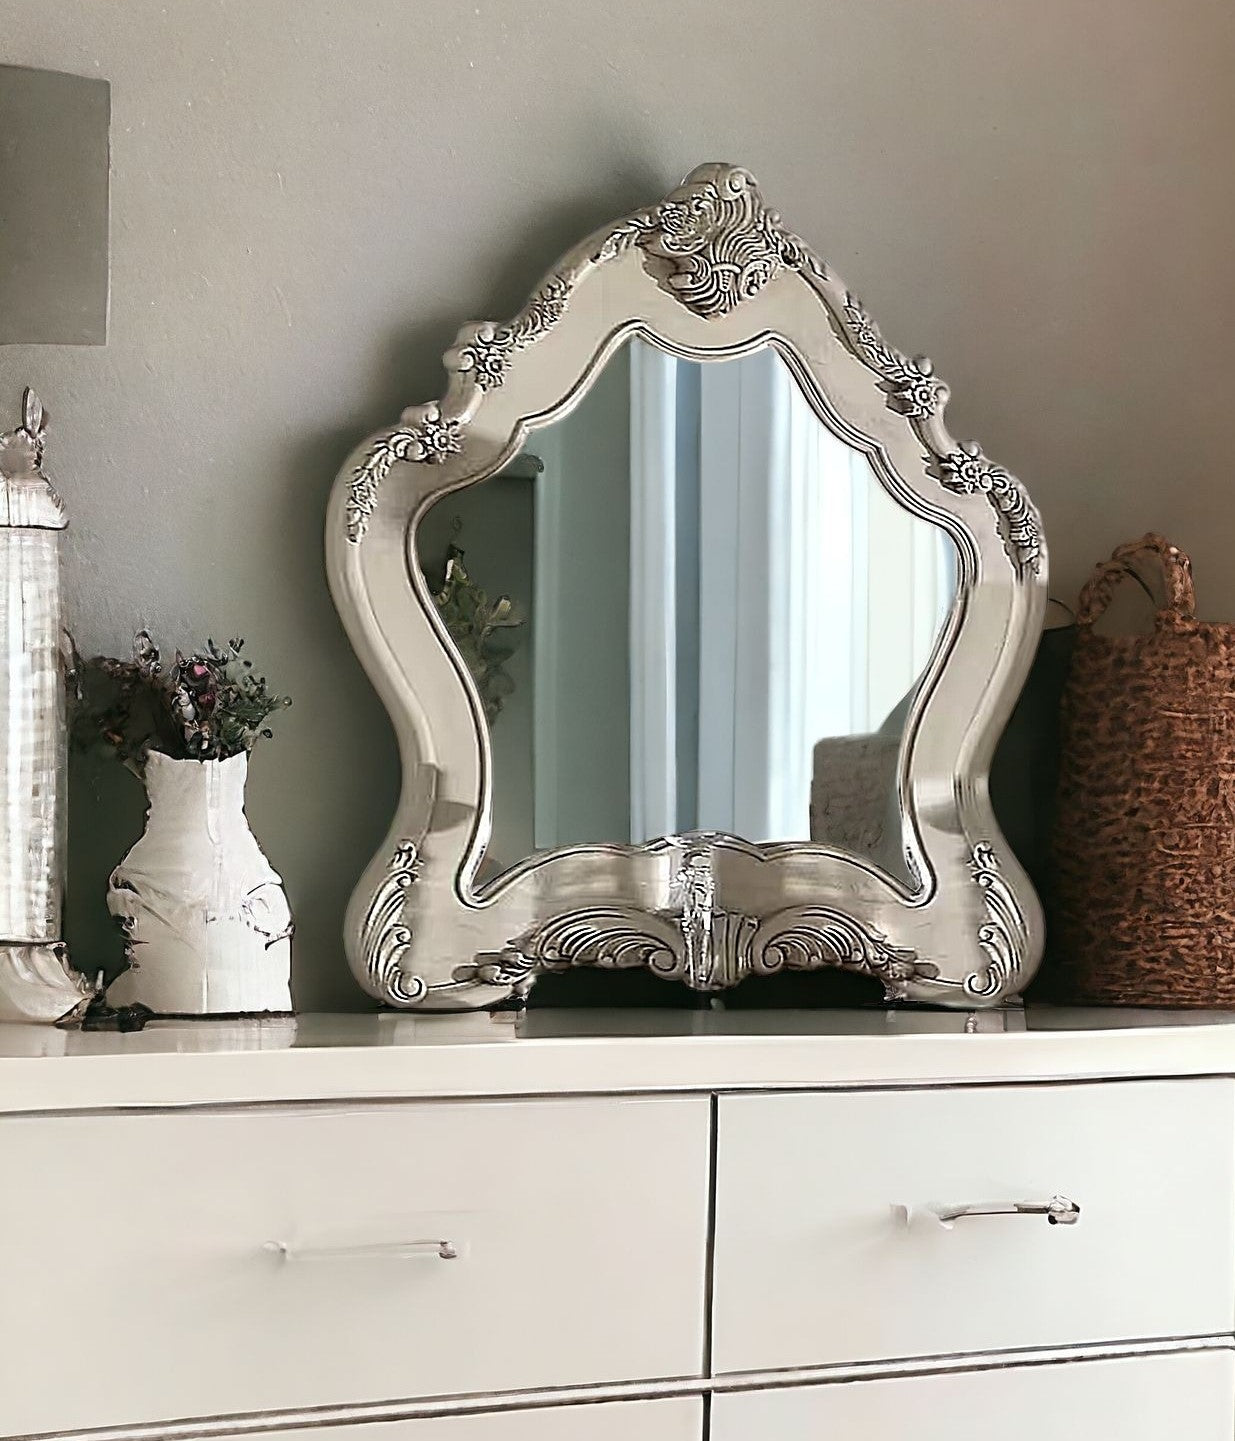 38" Silver Square Framed Accent Mirror